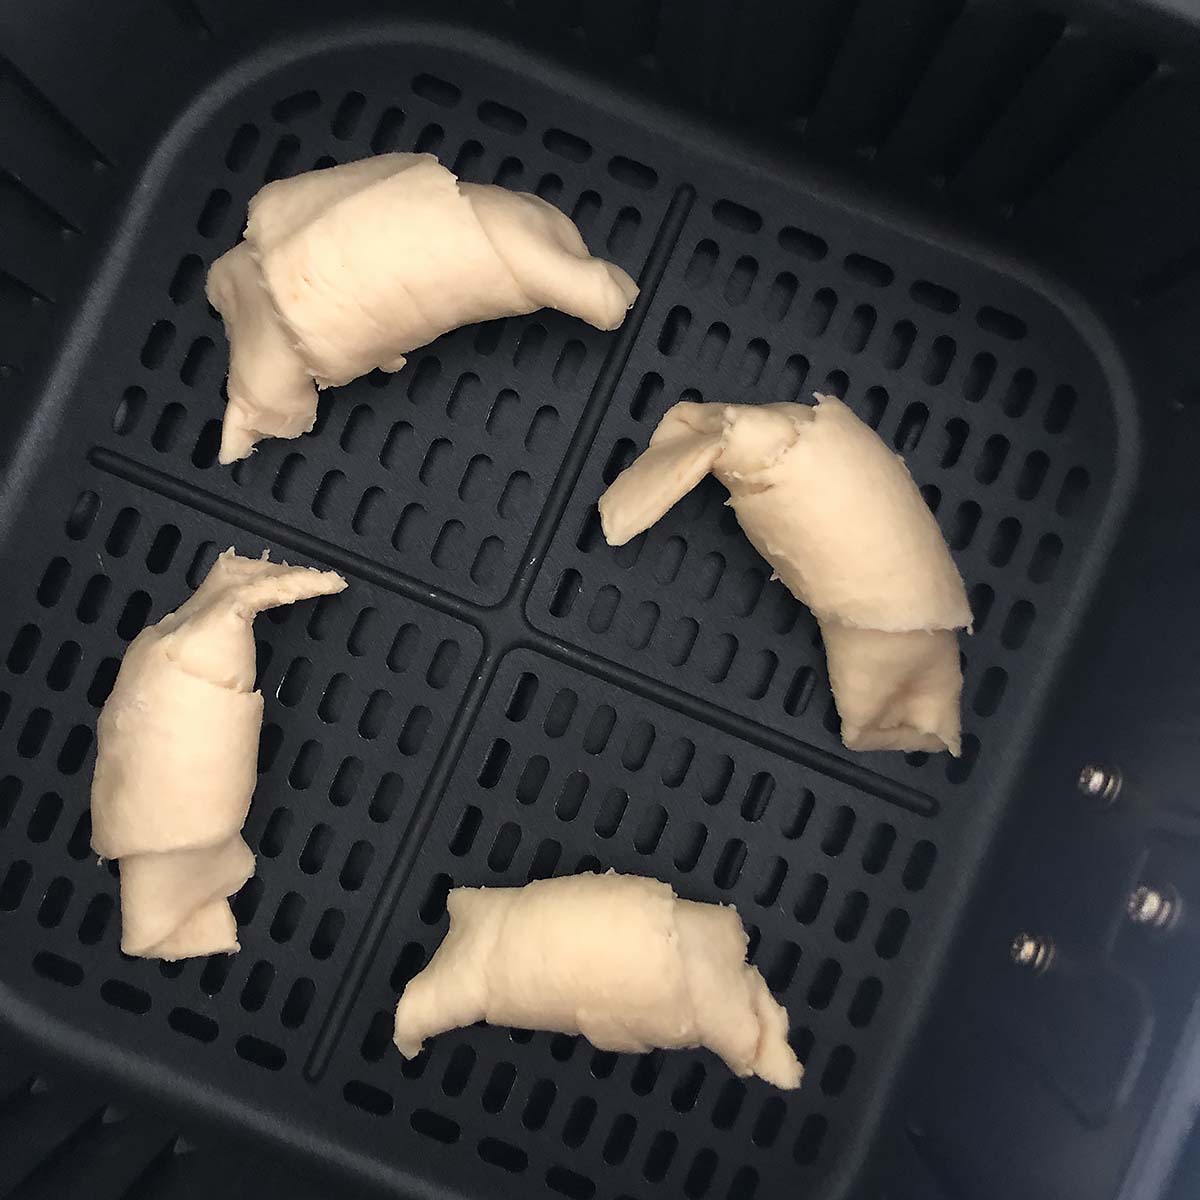 crescent rolls in the air fryer